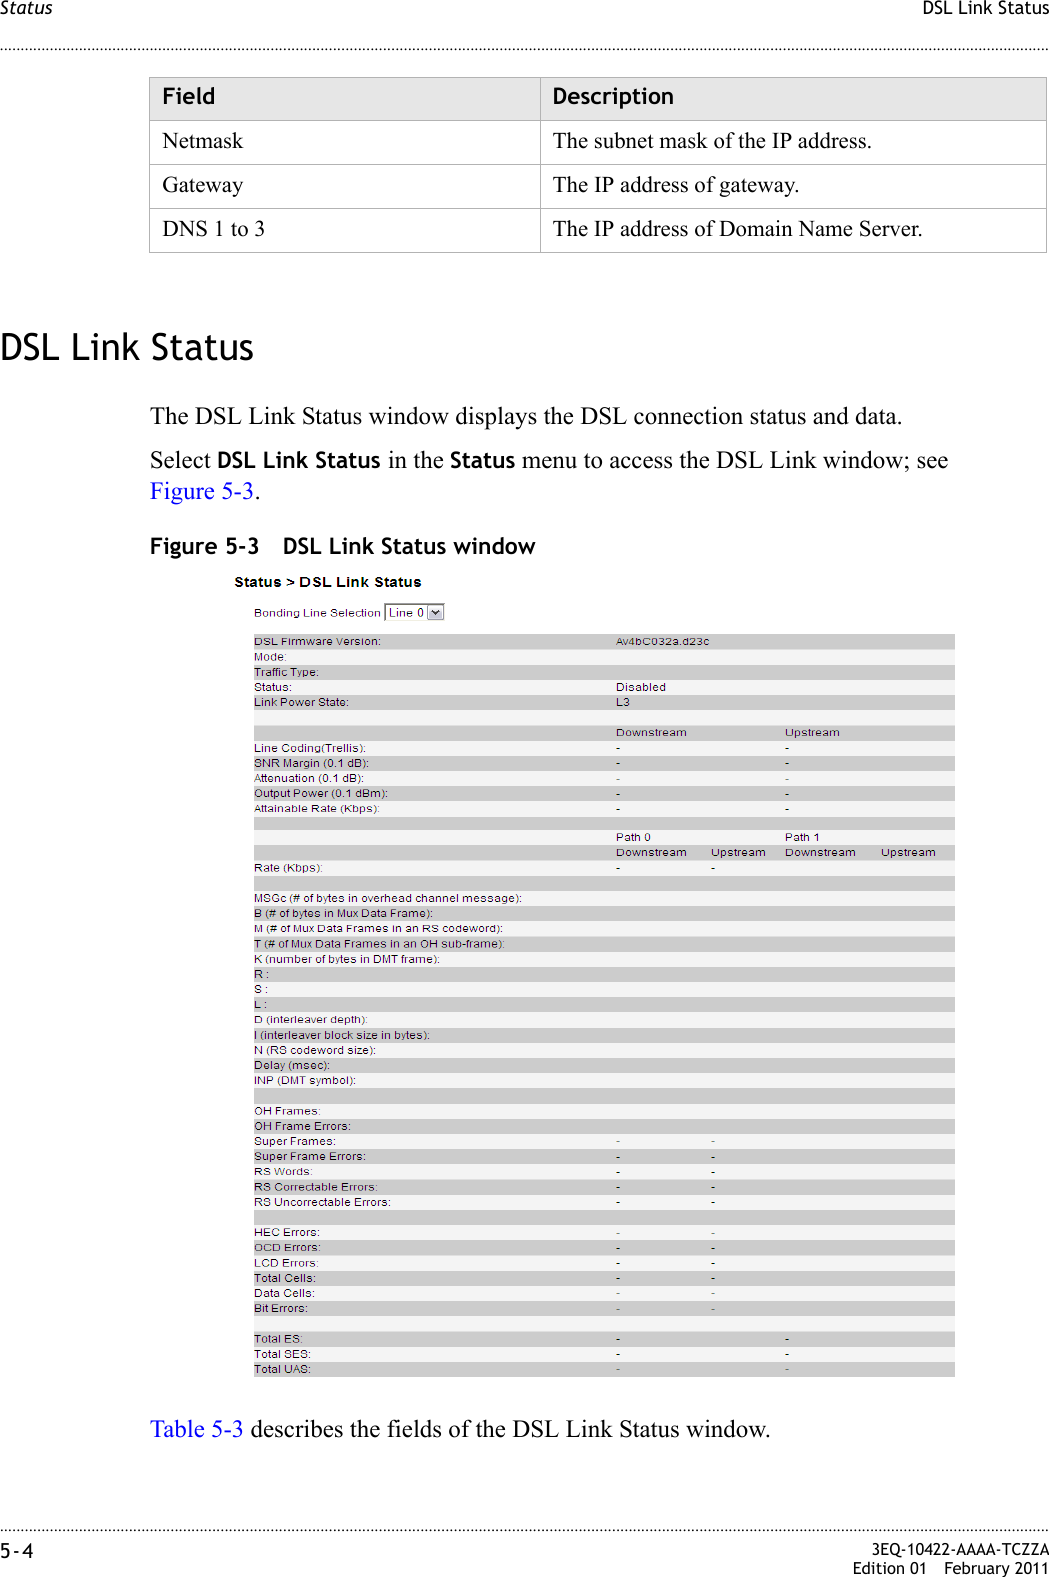 ............................................................................................................................................................................................................................................................DSL Link StatusStatus5-4  3EQ-10422-AAAA-TCZZAEdition 01 February 2011............................................................................................................................................................................................................................................................DSL Link StatusThe DSL Link Status window displays the DSL connection status and data.Select DSL Link Status in the Status menu to access the DSL Link window; see Figure 5-3.Figure 5-3 DSL Link Status windowTable 5-3 describes the fields of the DSL Link Status window.Netmask The subnet mask of the IP address.Gateway The IP address of gateway.DNS 1 to 3 The IP address of Domain Name Server.Field Description